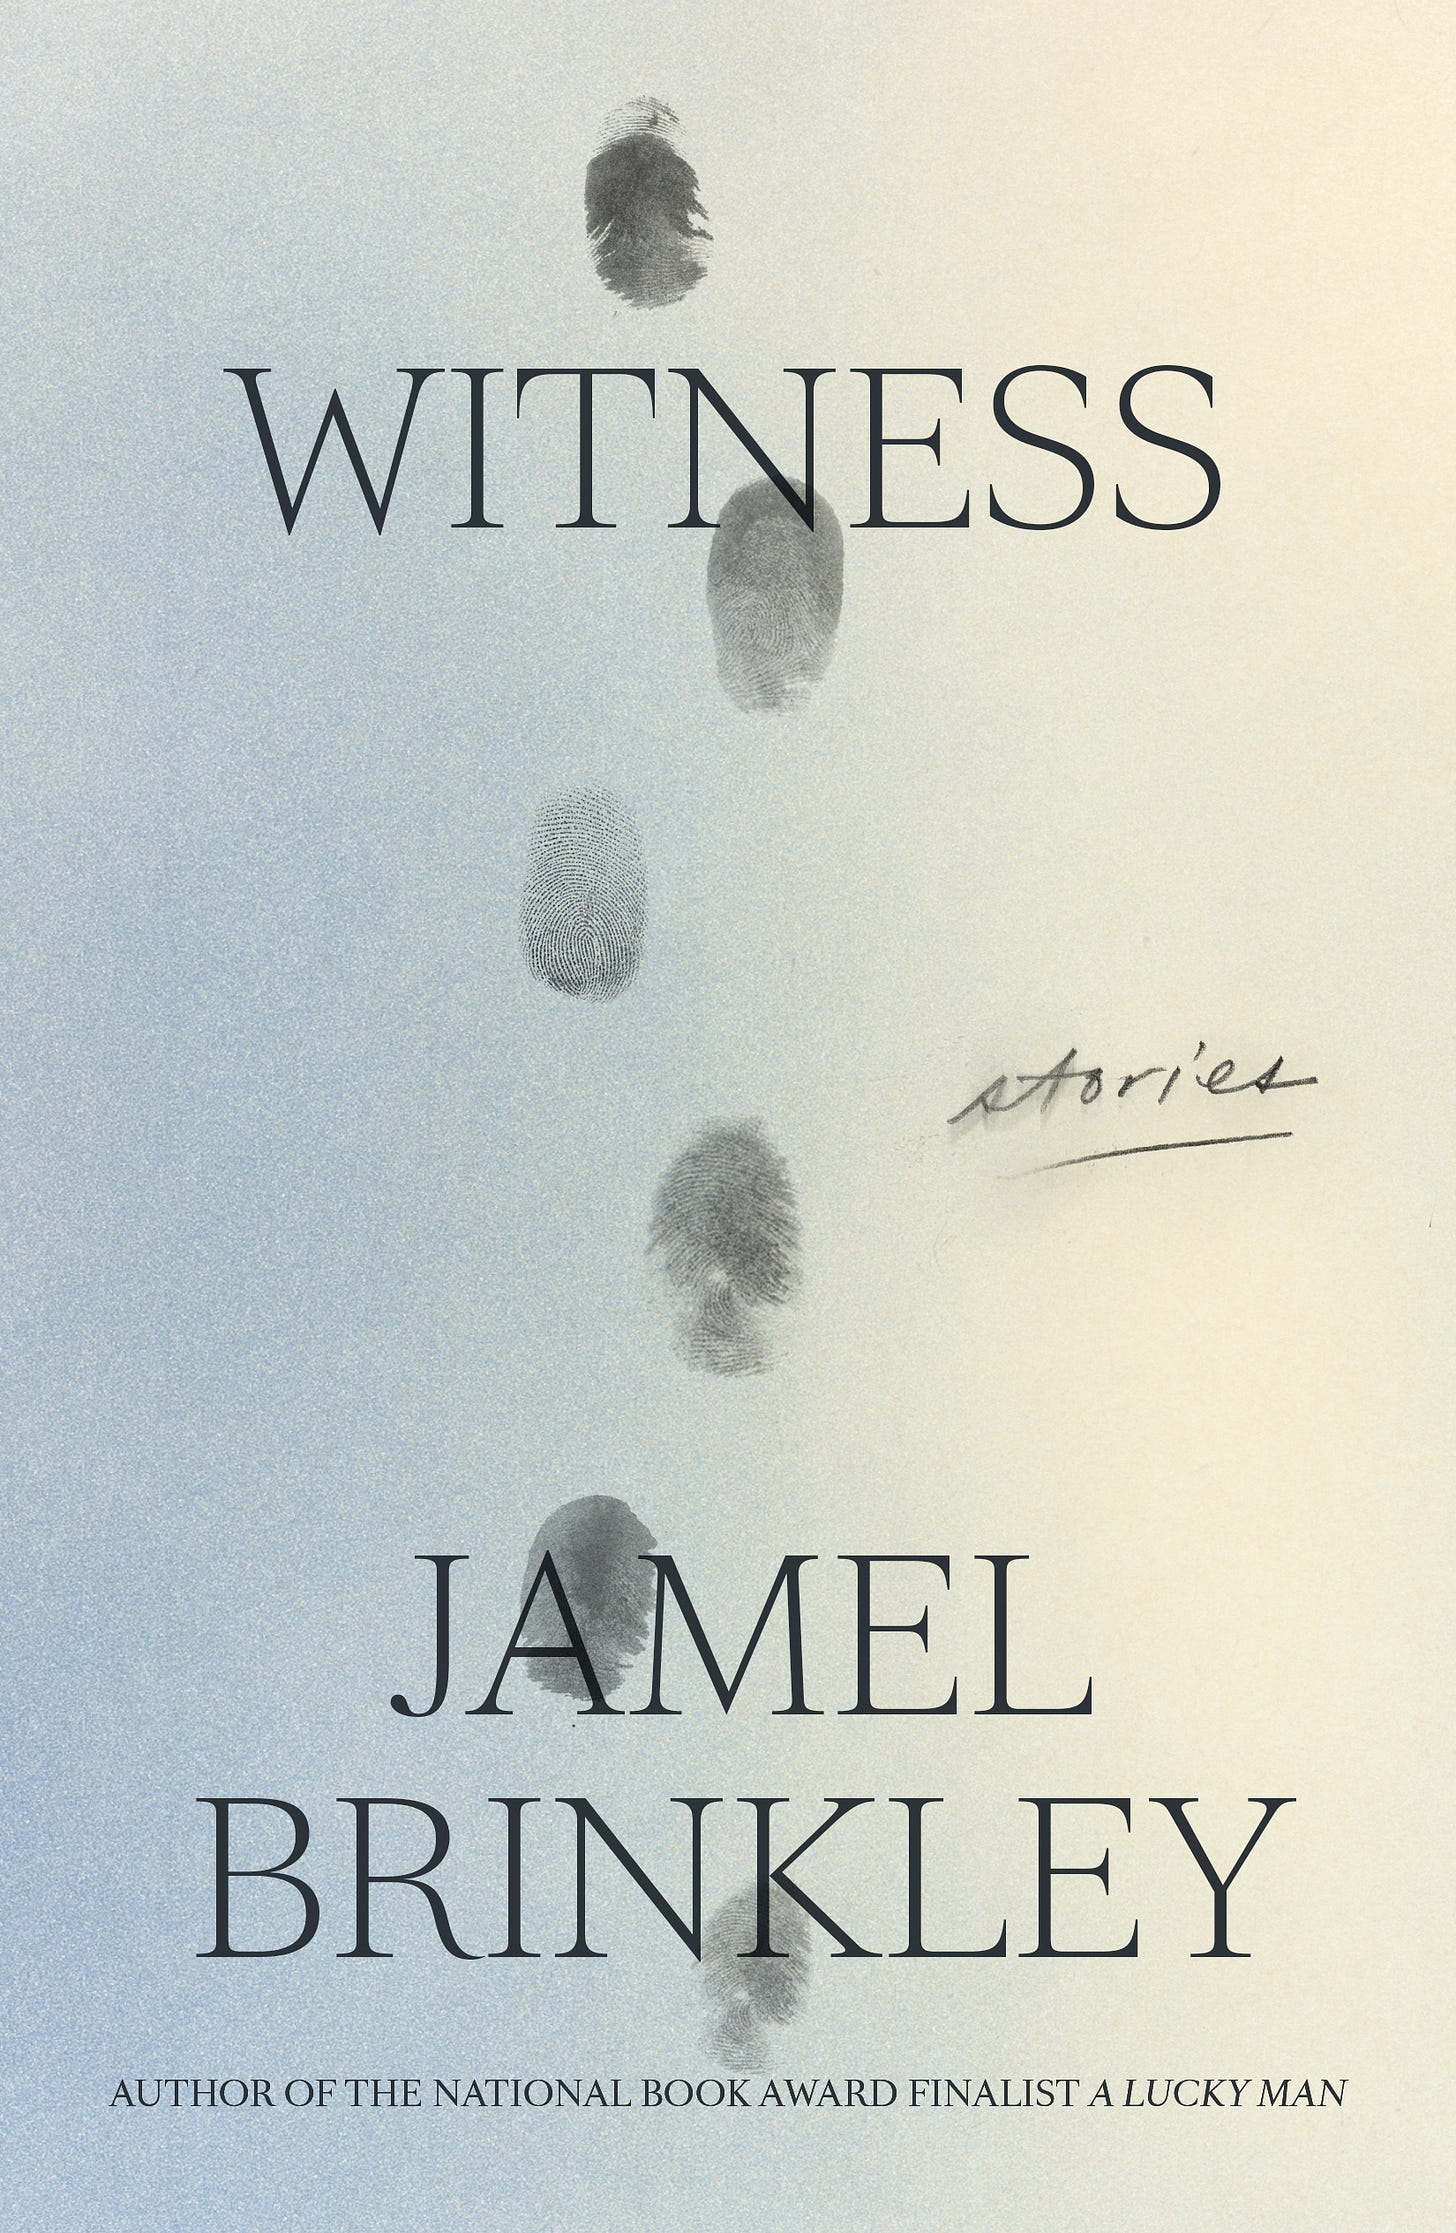 The cover of Jamel Brinkley's short story collection, Witness. Down the center of the cover are a series of grey, slightly smudged fingerprints. Toward the top, the book's title and at the bottom, on two lines, the author's name. The background is a gradient from slate blue to yellow.